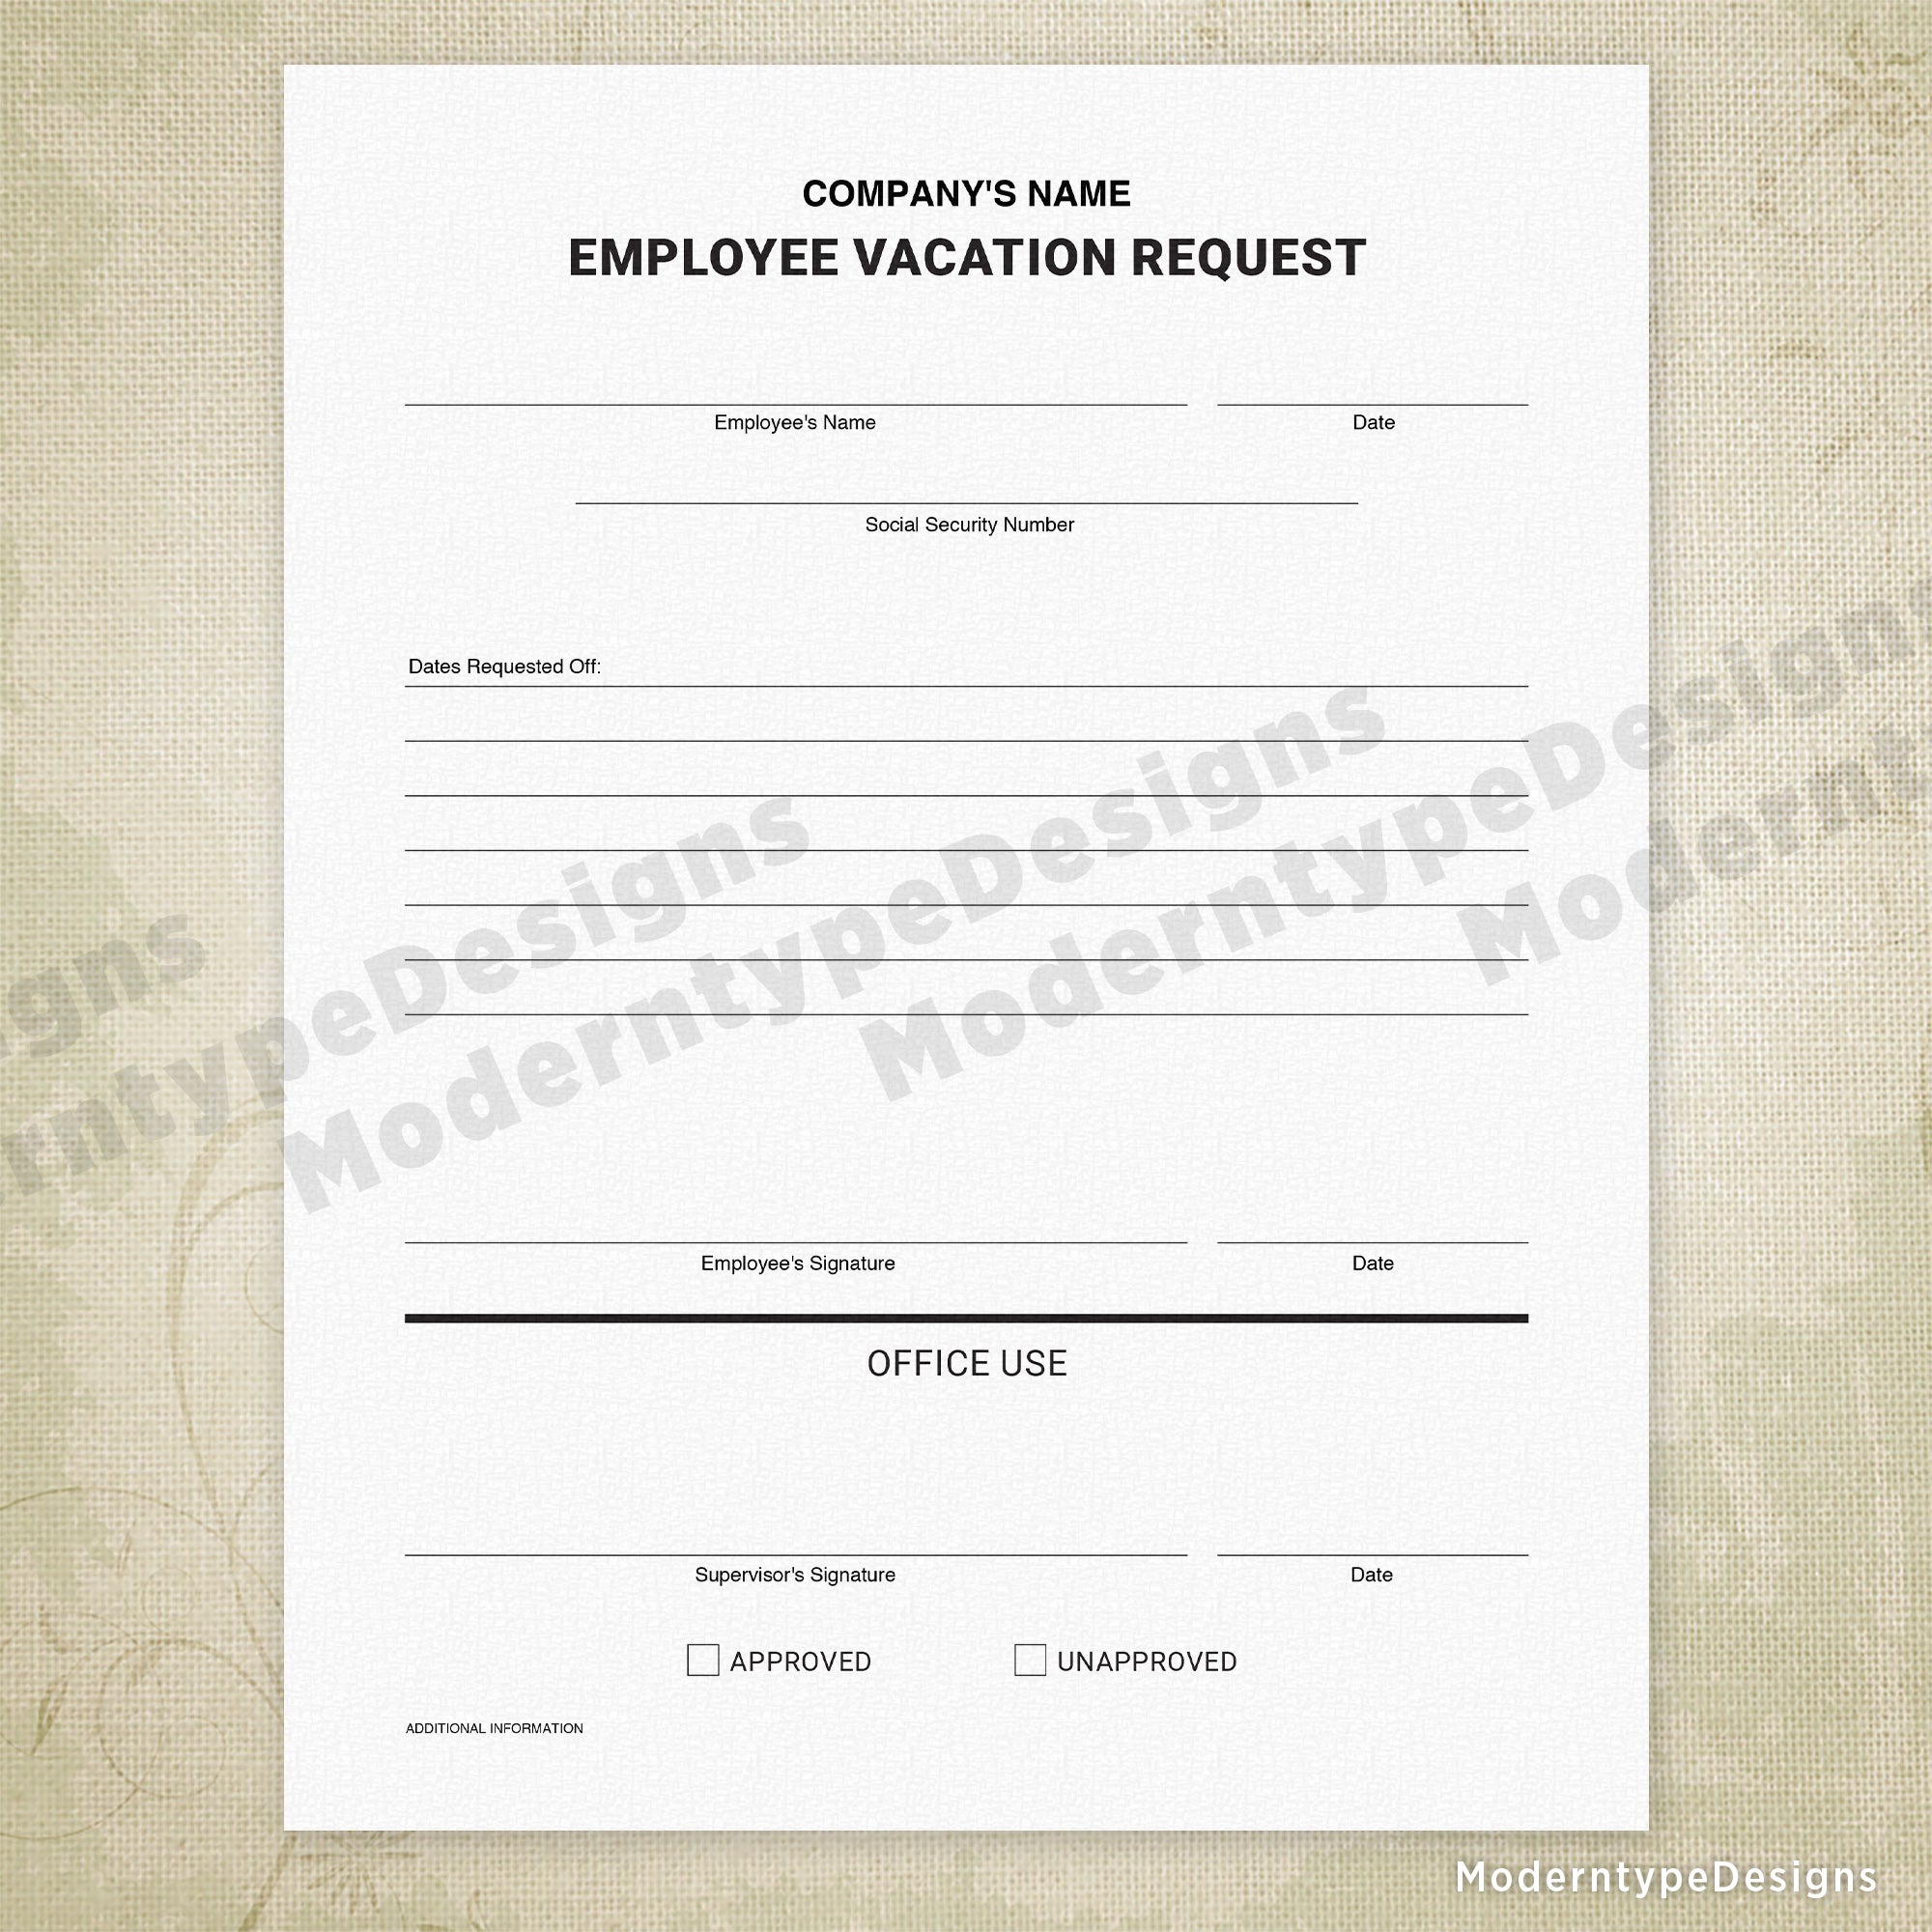 Employee Vacation Request Printable Form, Personalized